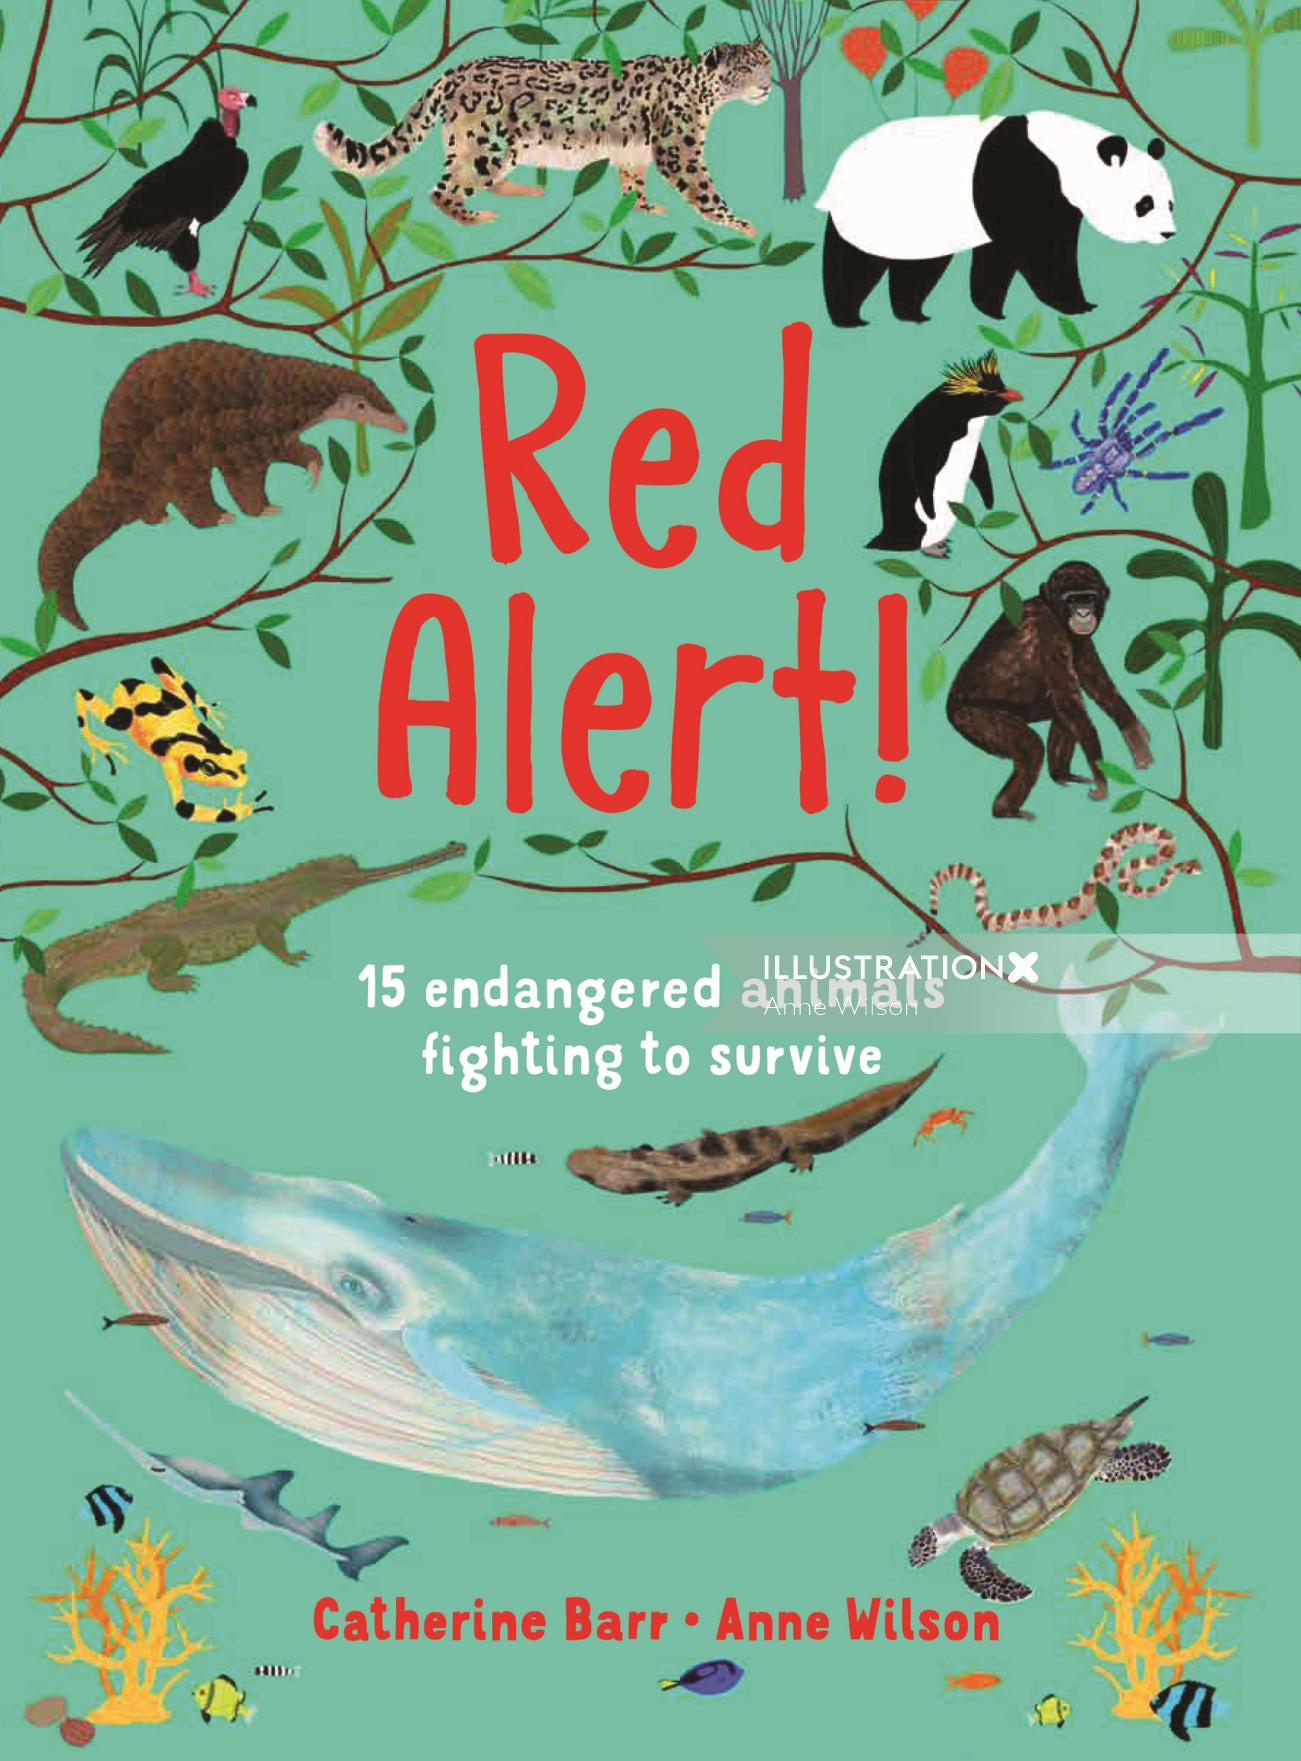 "Red alert Cover for Otterbarry Books
"